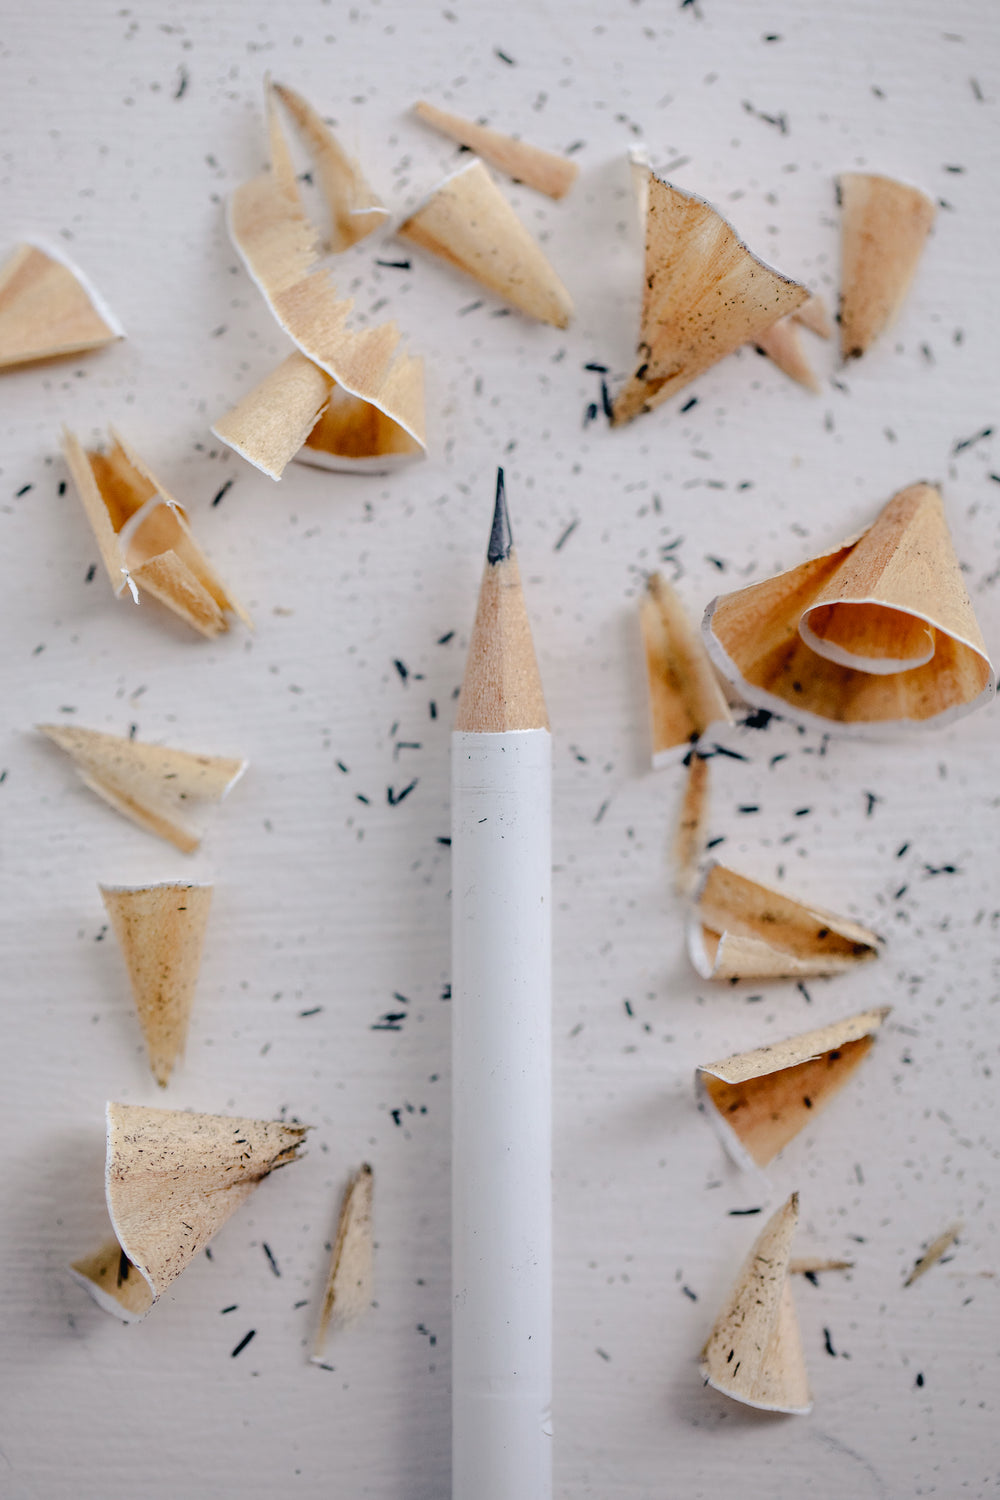 a sharpened pencil with lead shavings